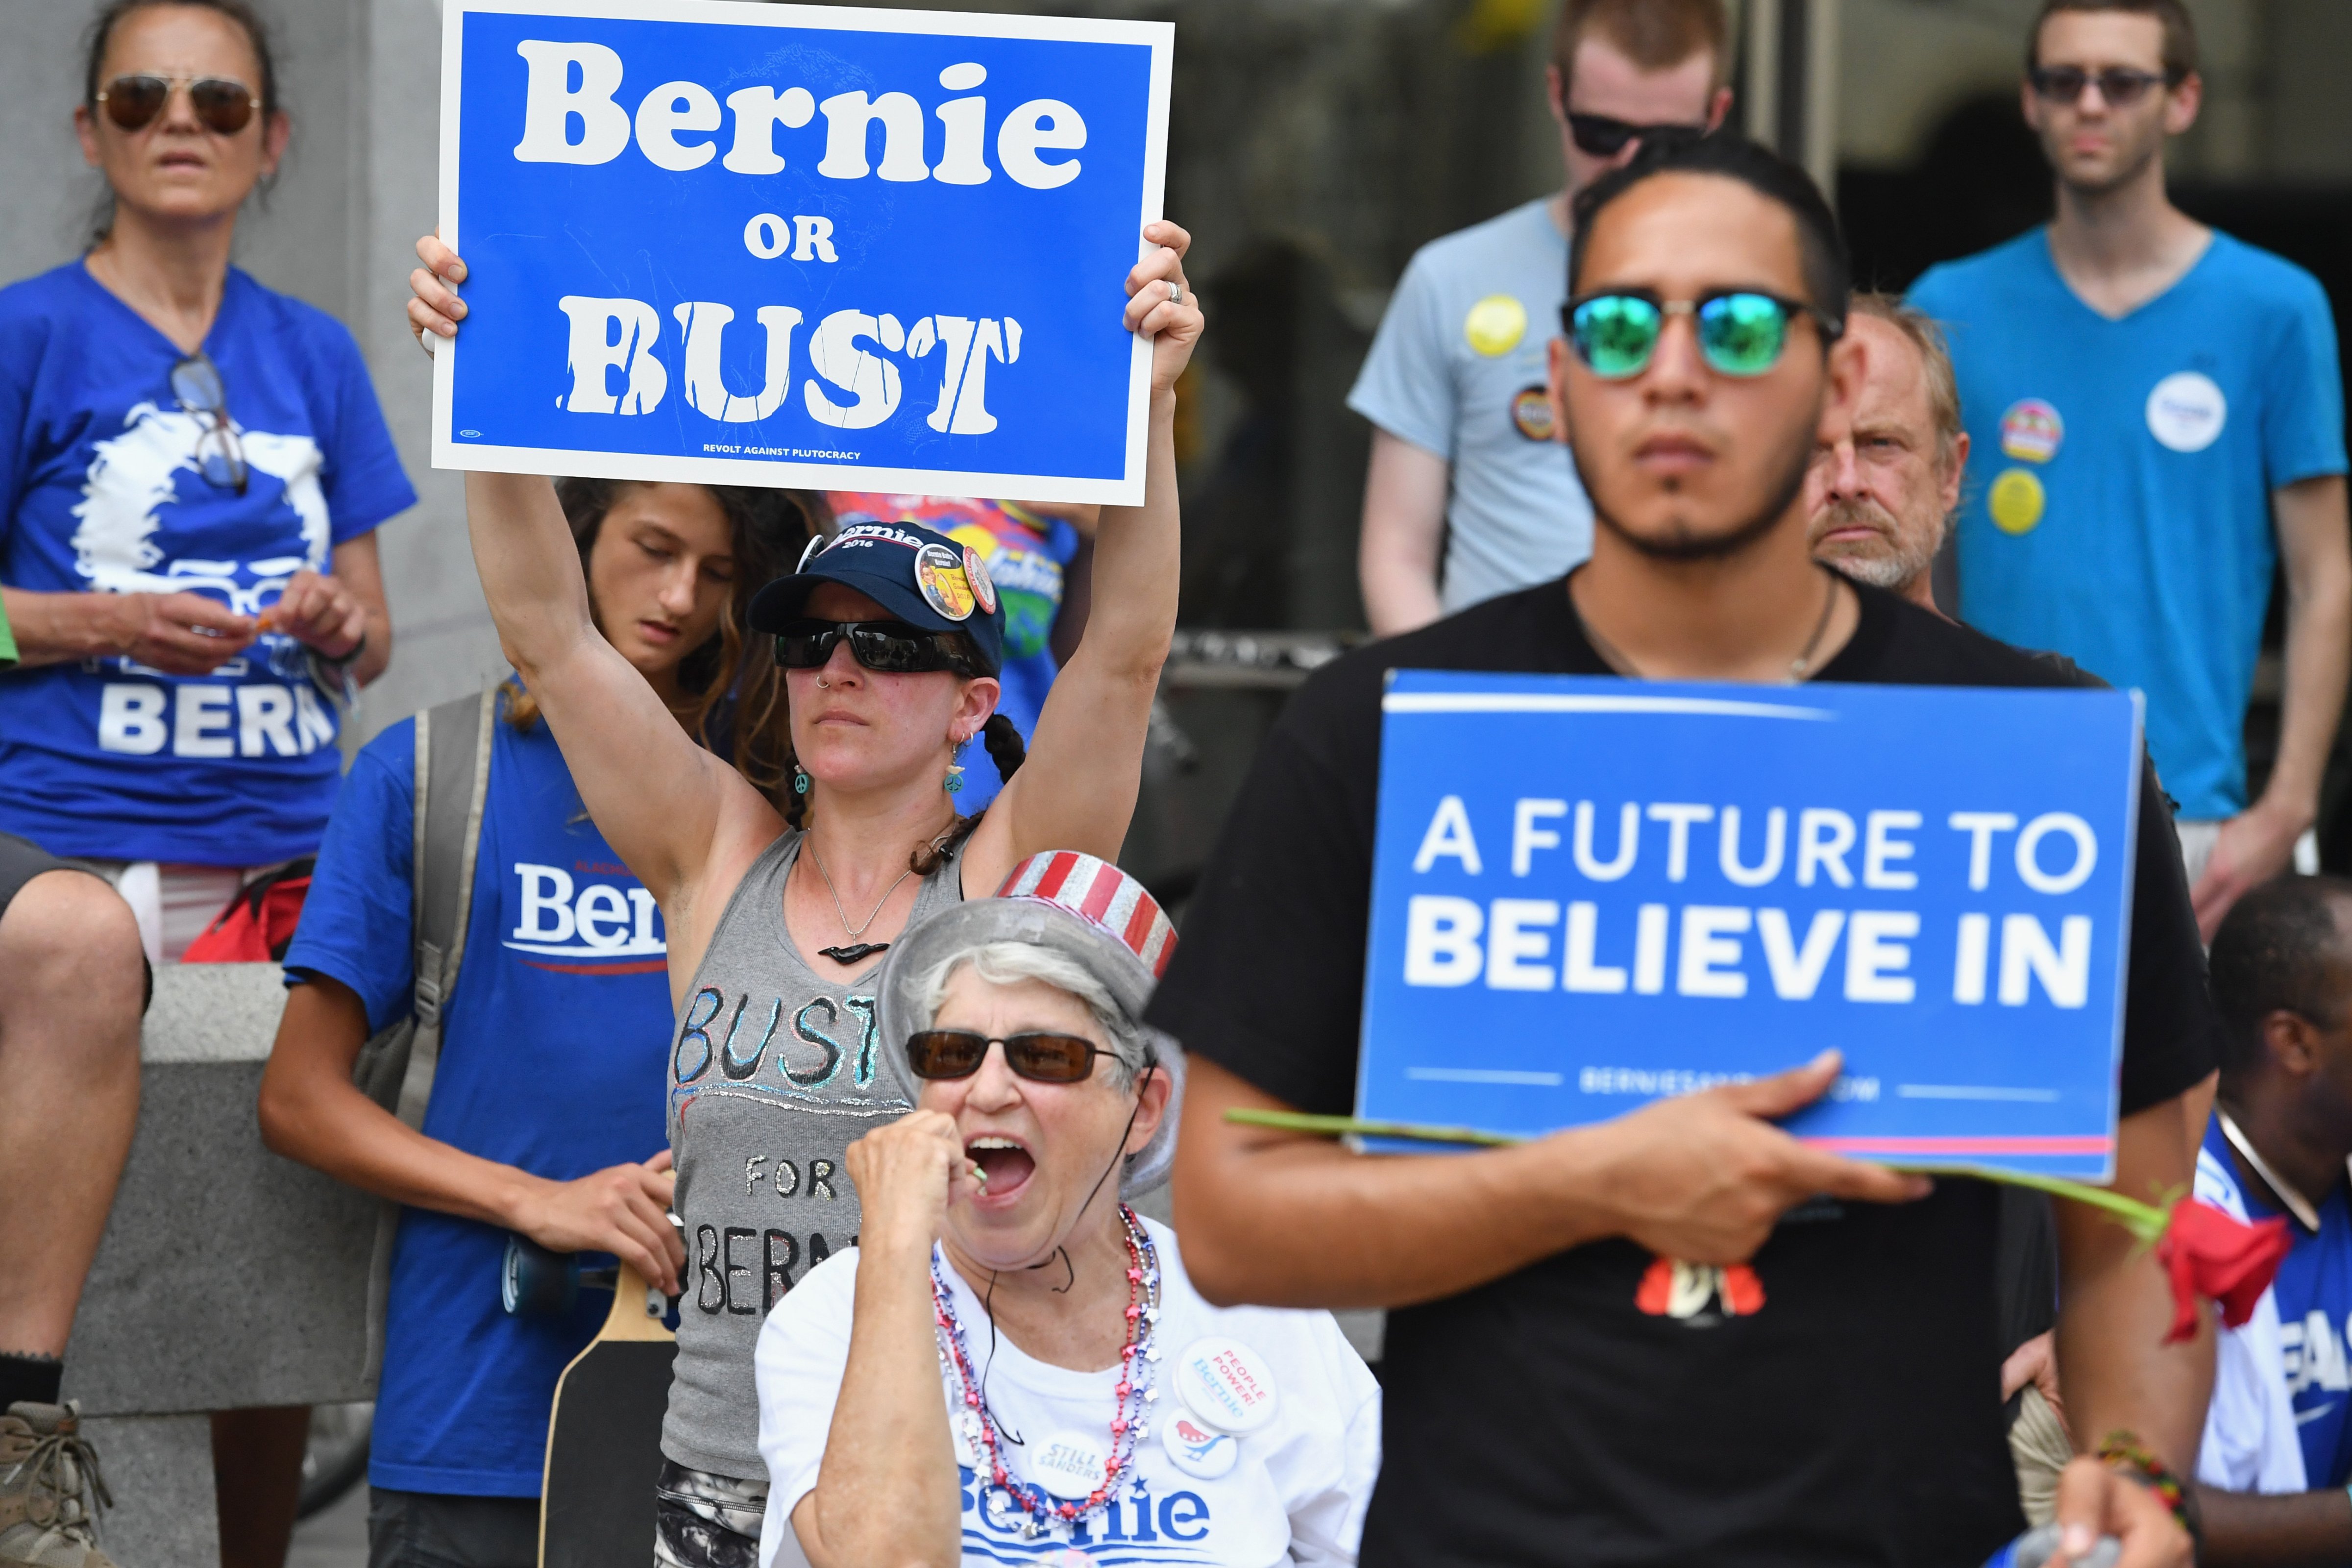 Bernie Sanders supporters gather at City Hall on the second day of the Democratic National Convention, on July 26, 2016 in Philadelphia. (Jeff J. Mitchell—Getty Images)